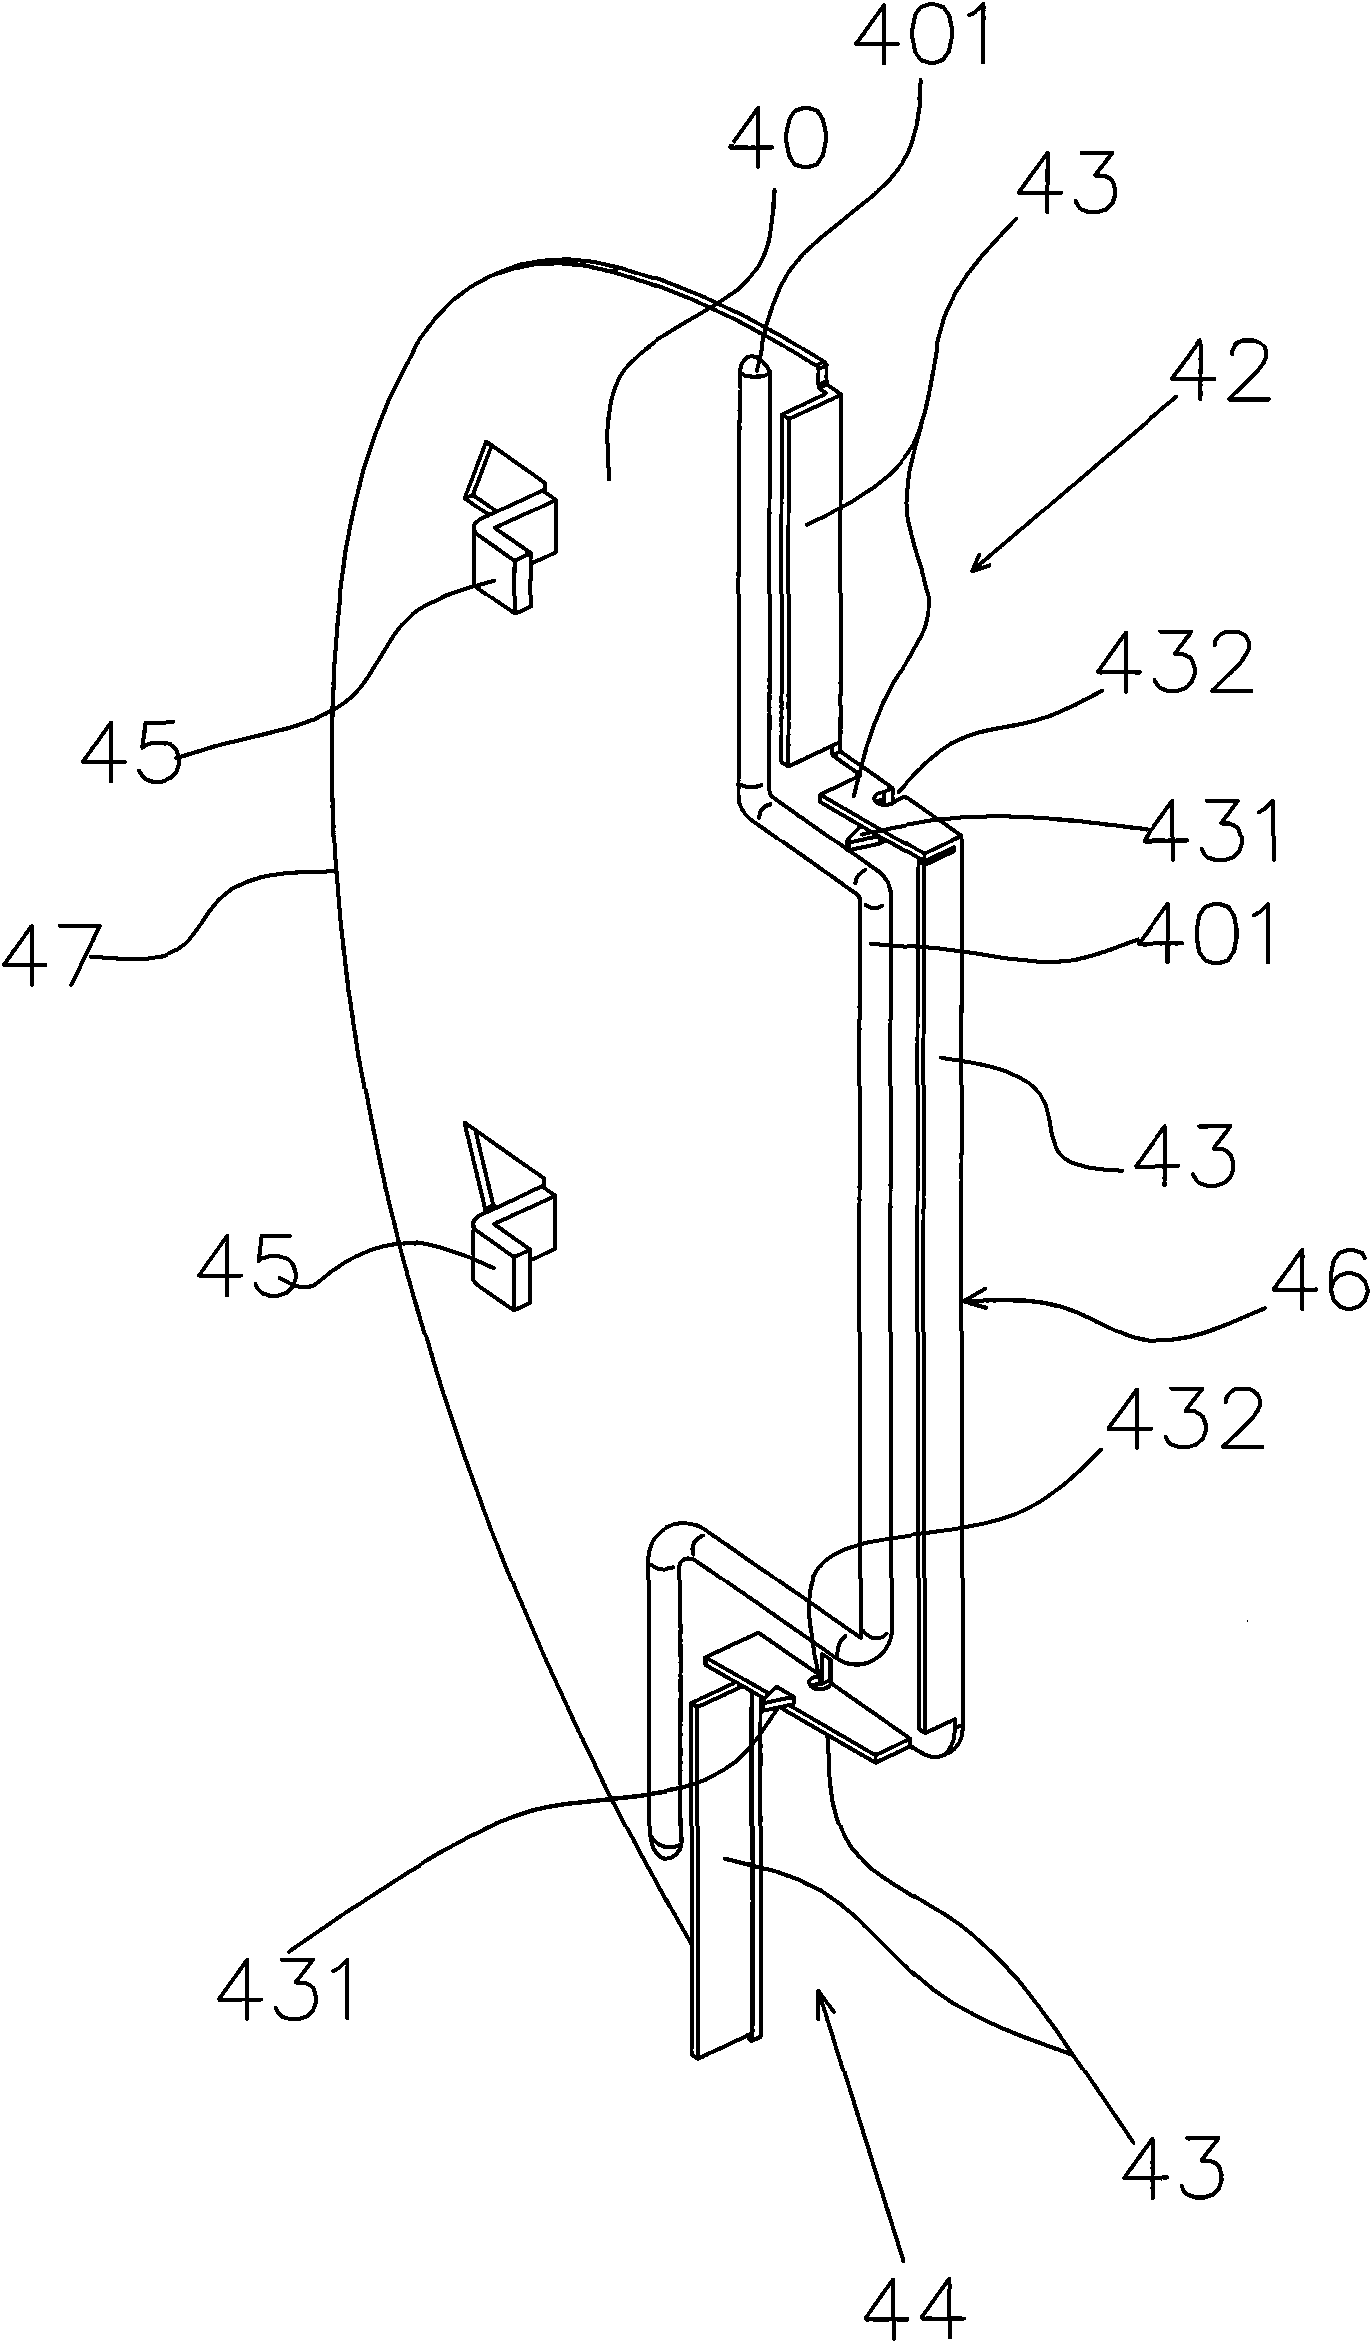 Connection device for LED lamp and radiating fins